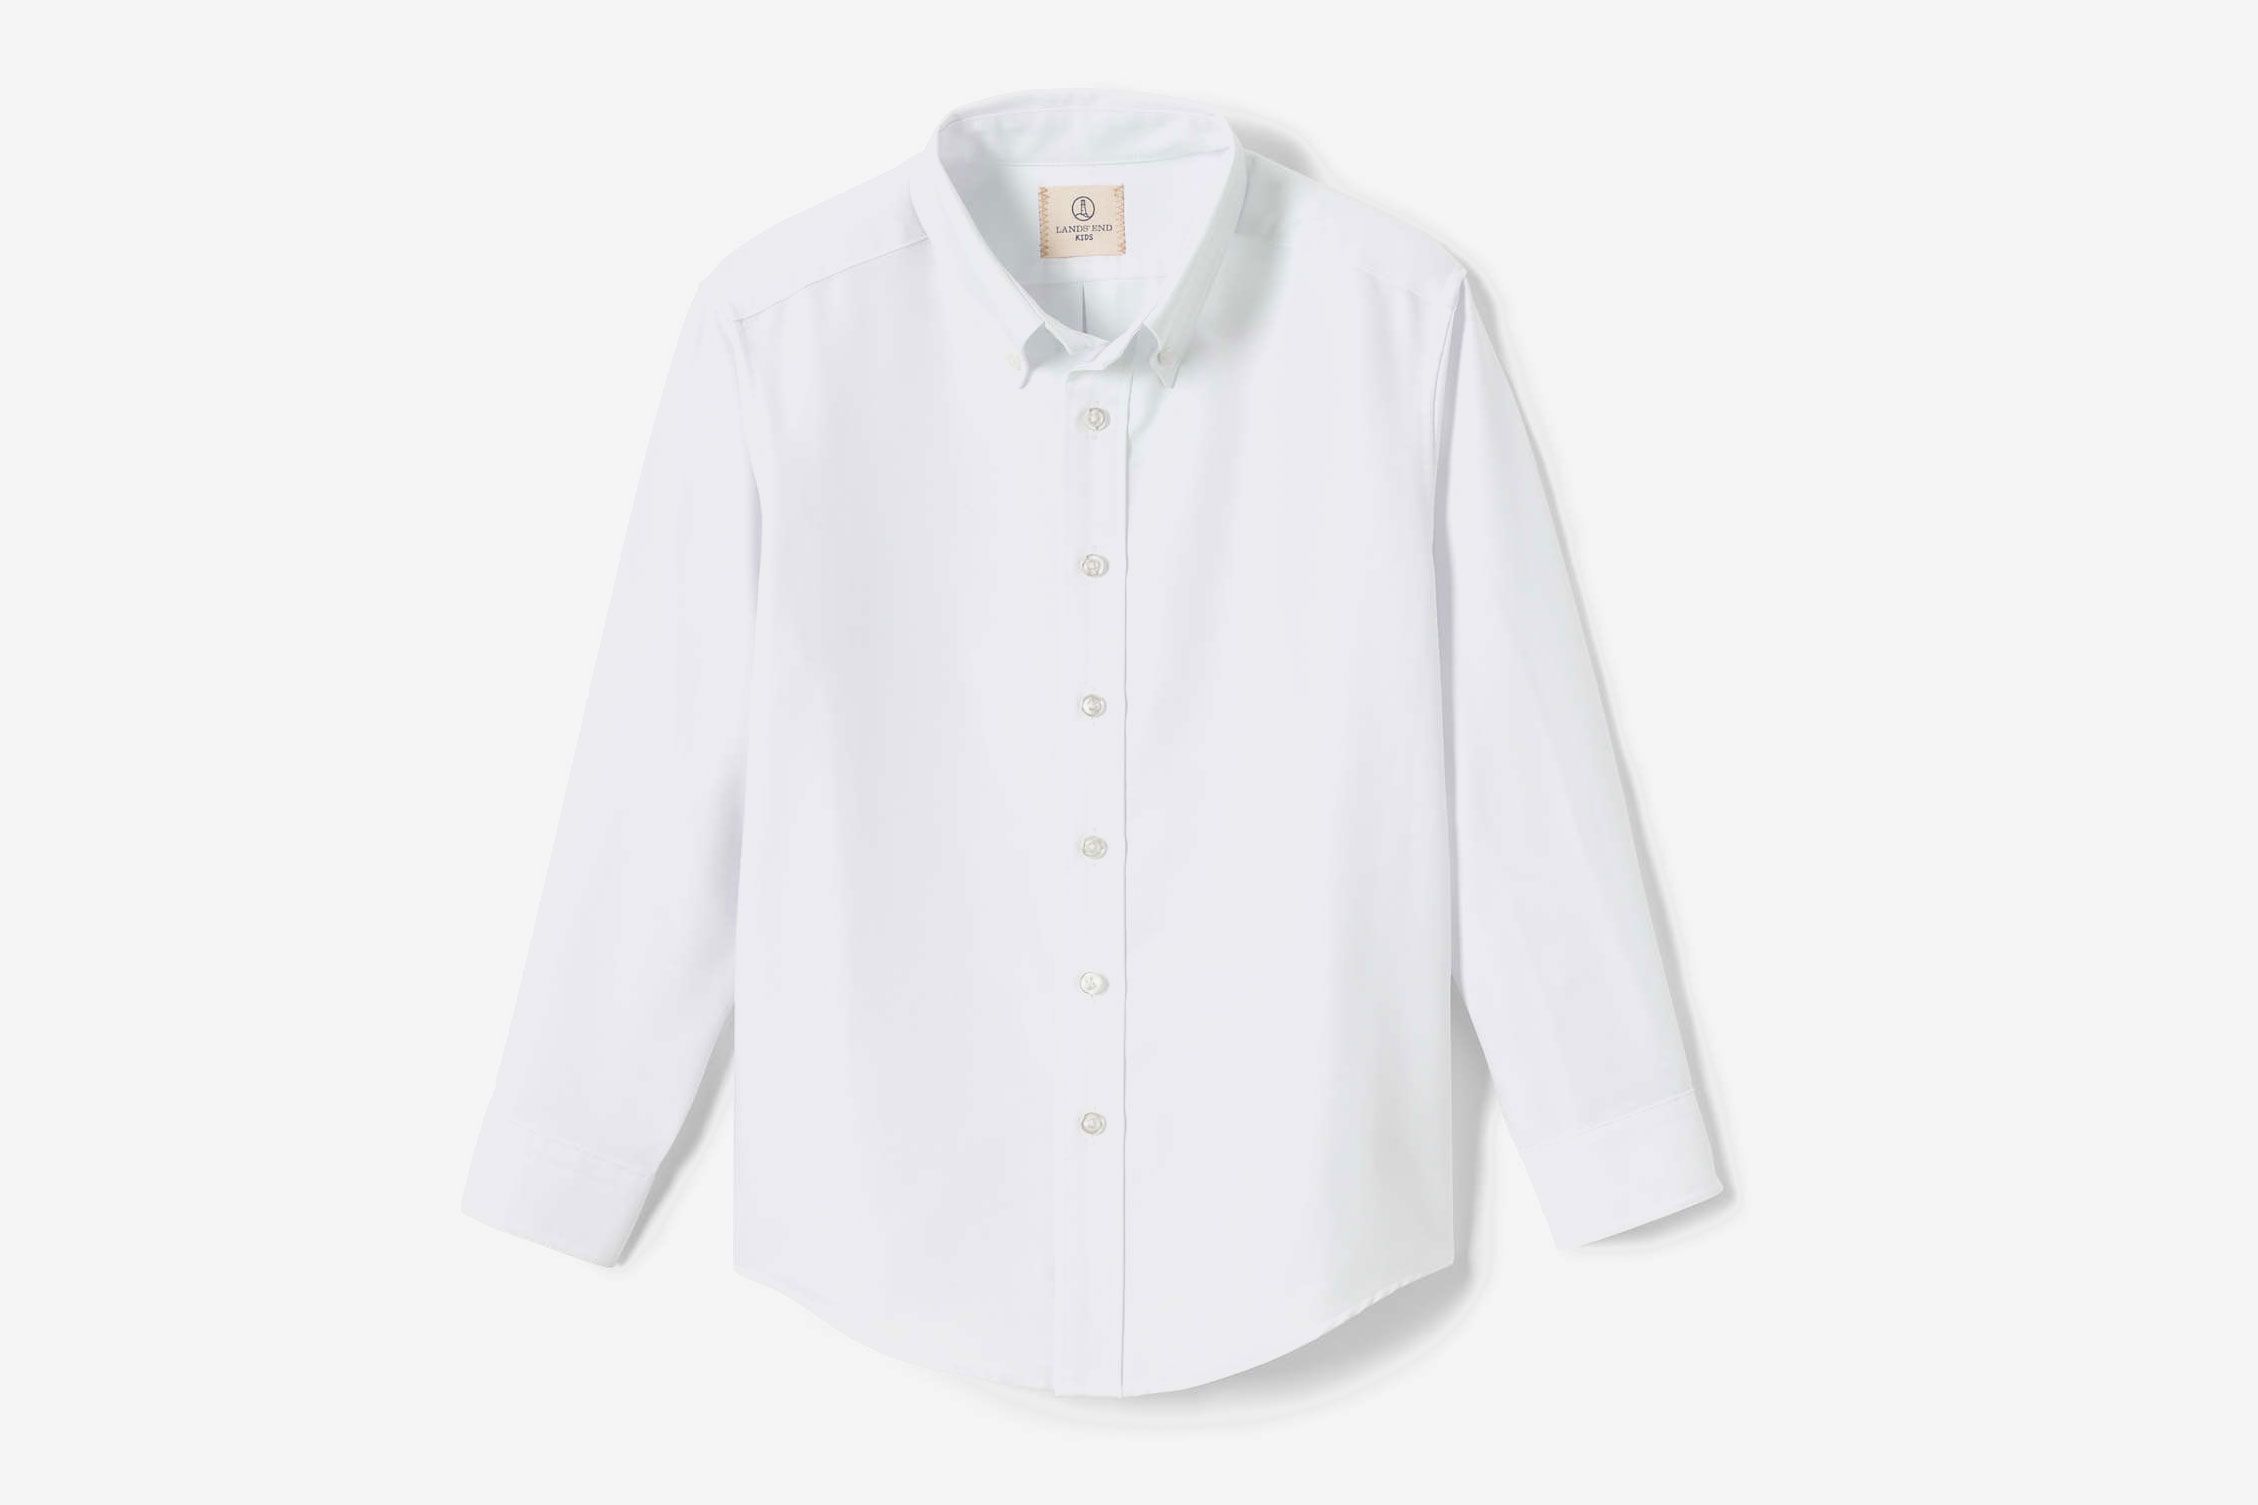 Naked girls in button up shirts 18 Best White Button Down Shirts For Women 2021 The Strategist